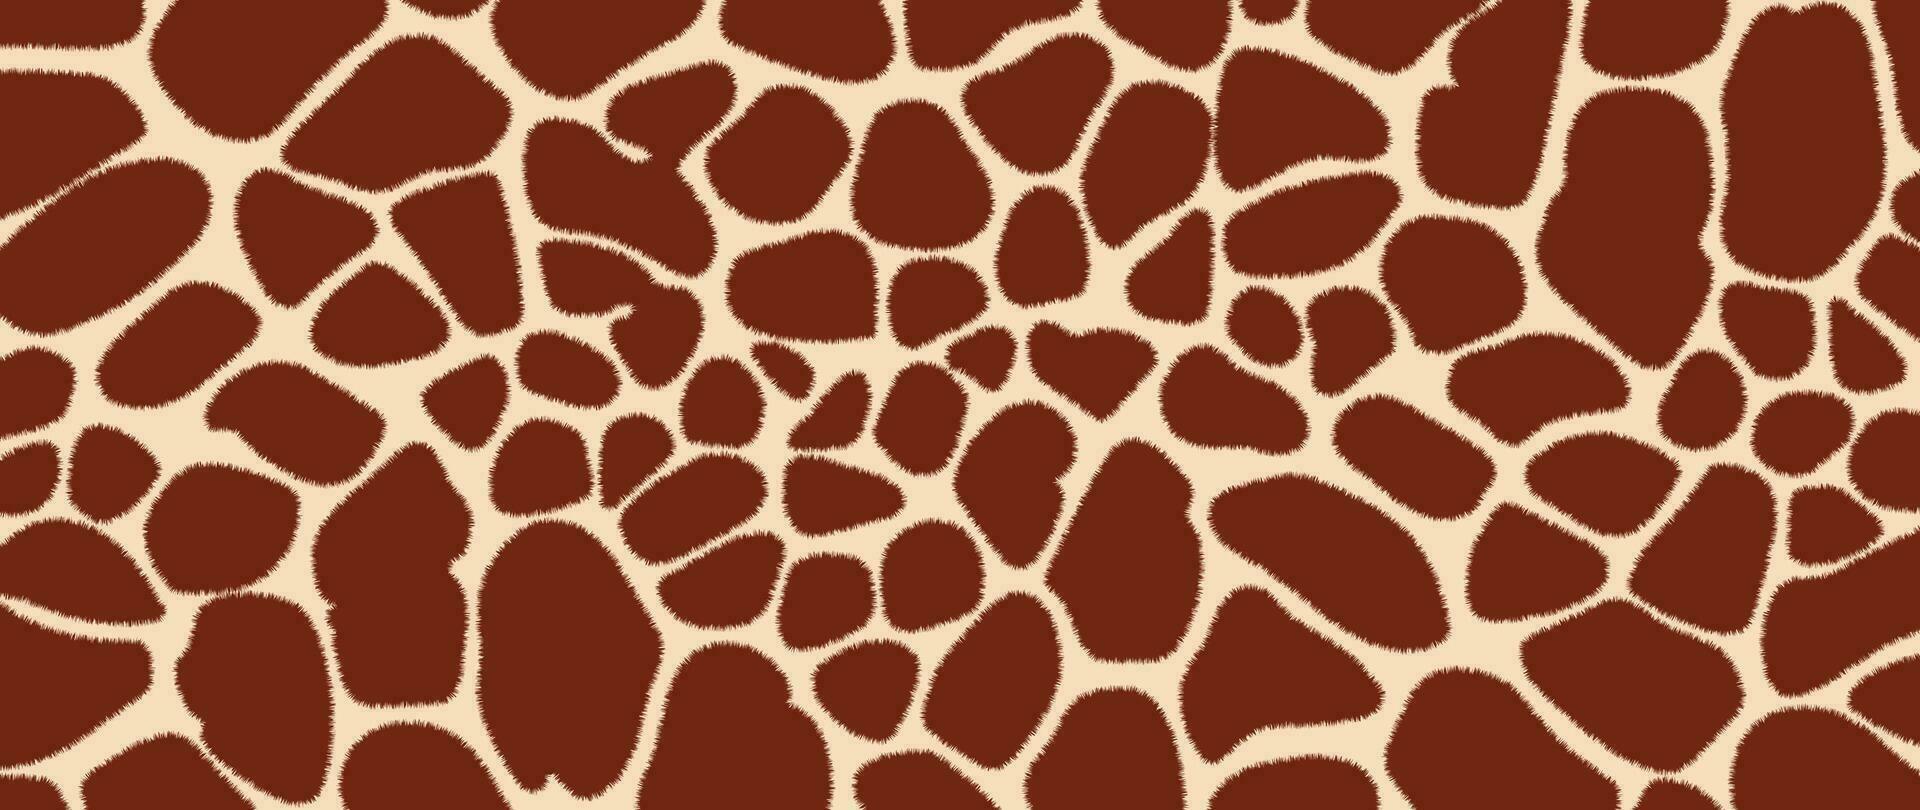 Abstract giraffe skin pattern background. Abstract art background vector design with animal skin, doodle. Creative illustration for fabric, prints, cover, wrapping paper, textile, wallpaper.